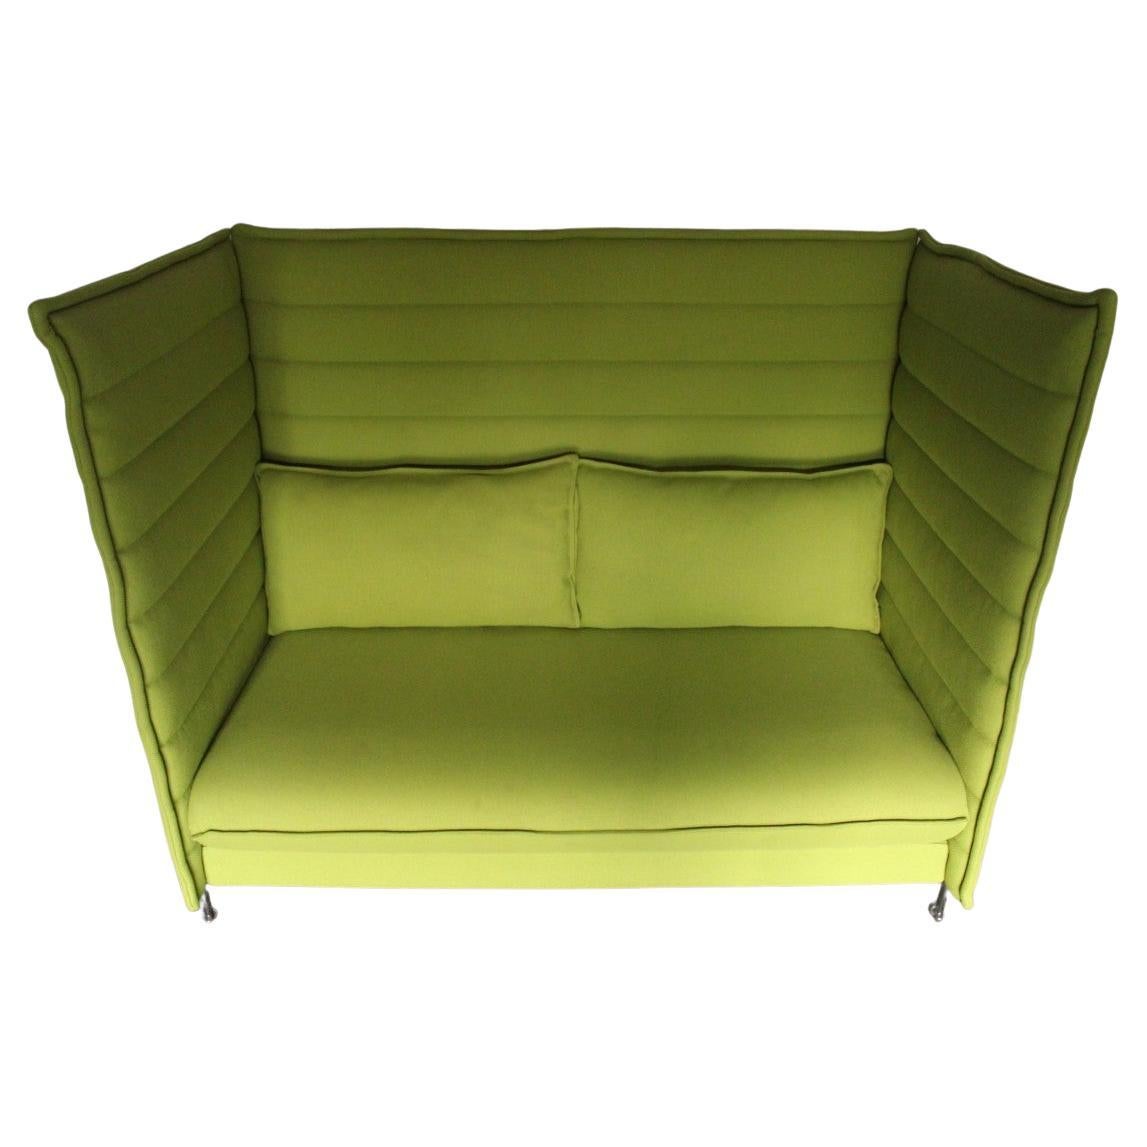 Sublime Mint Vitra “Alcove” 2-Seat Highback Sofa in Lime Green “Credo” Fabric  For Sale